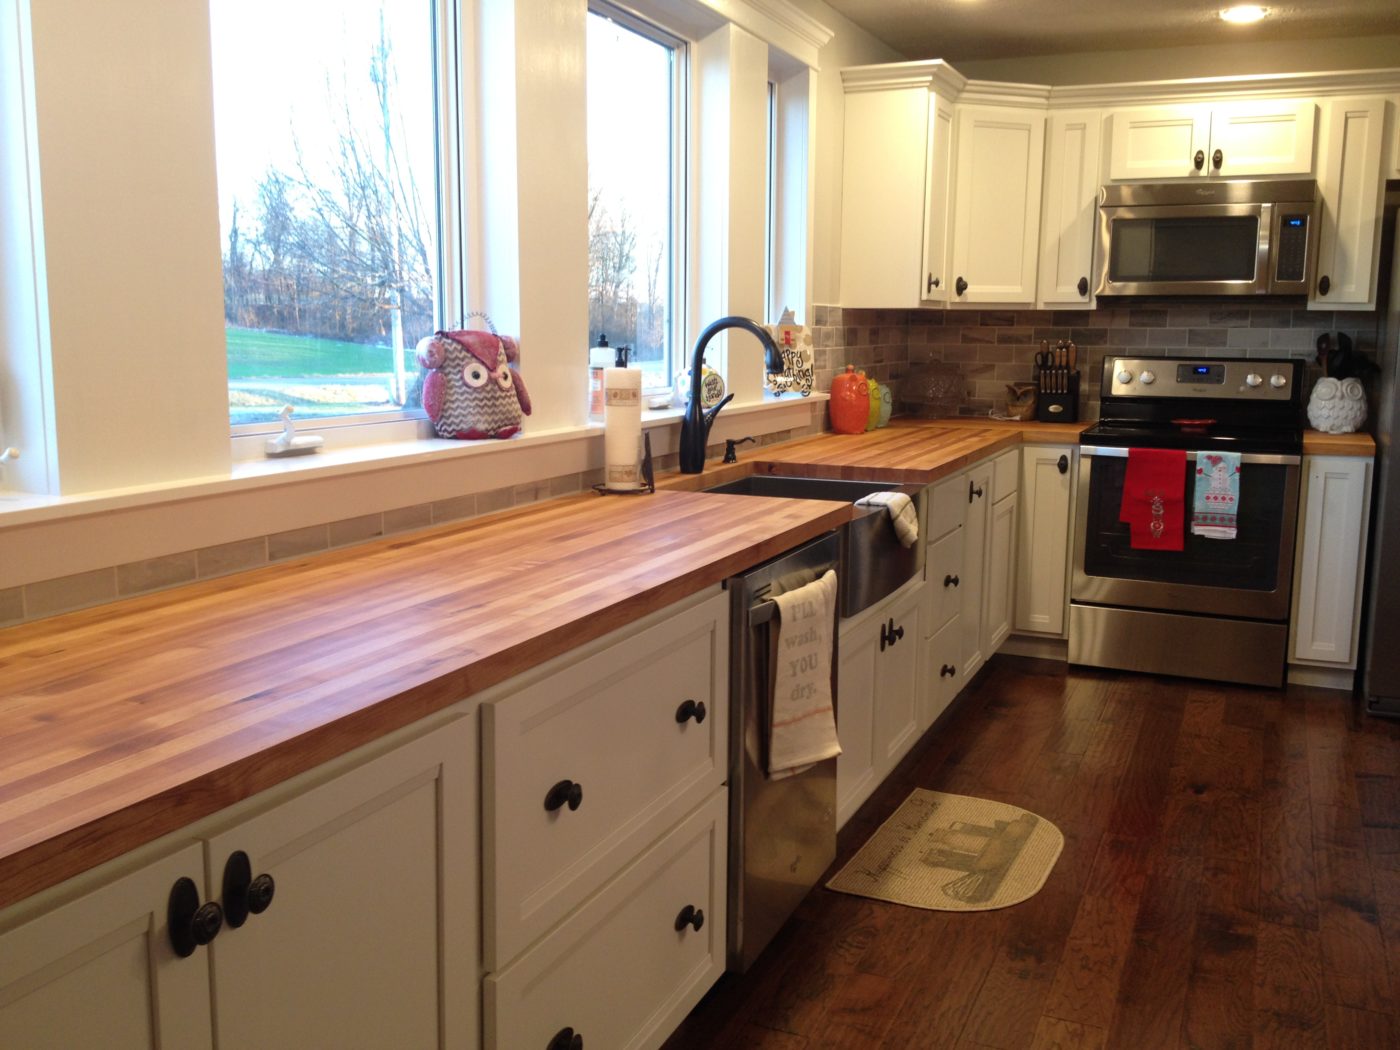 Pros and Cons of Butcher block Countertops in the Kitchen